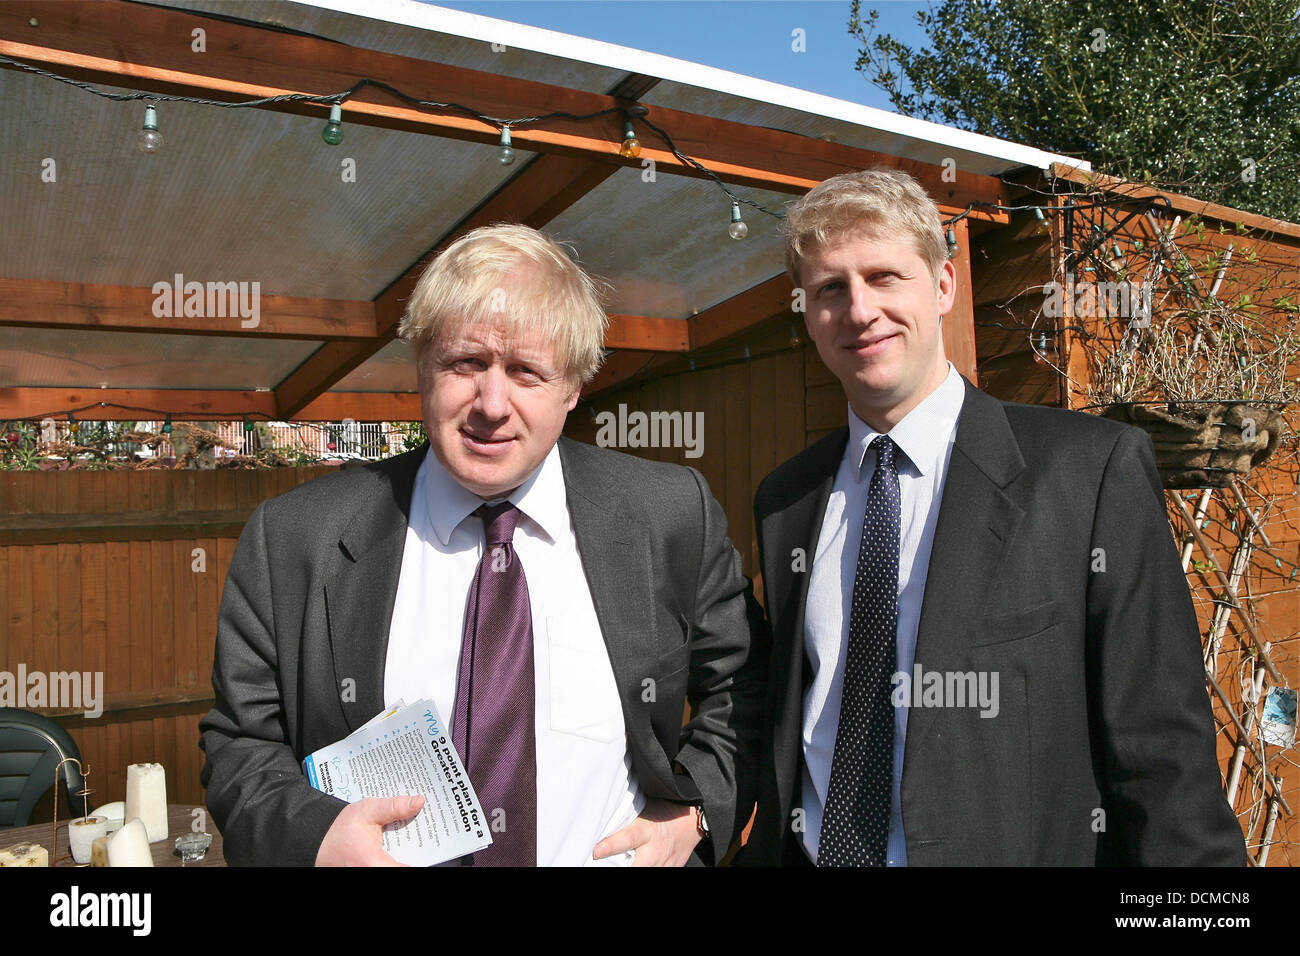 Boris Johnson has suggested that it is “very likely” that his brother will become the Prime Minister - as he attacked Ed Miliband for “shafting” his brother David in the battle for the Labour leadership.  Boris Johnson poses with his brother Jo Johnson in the Conservative Office in Orpington Stock Photo